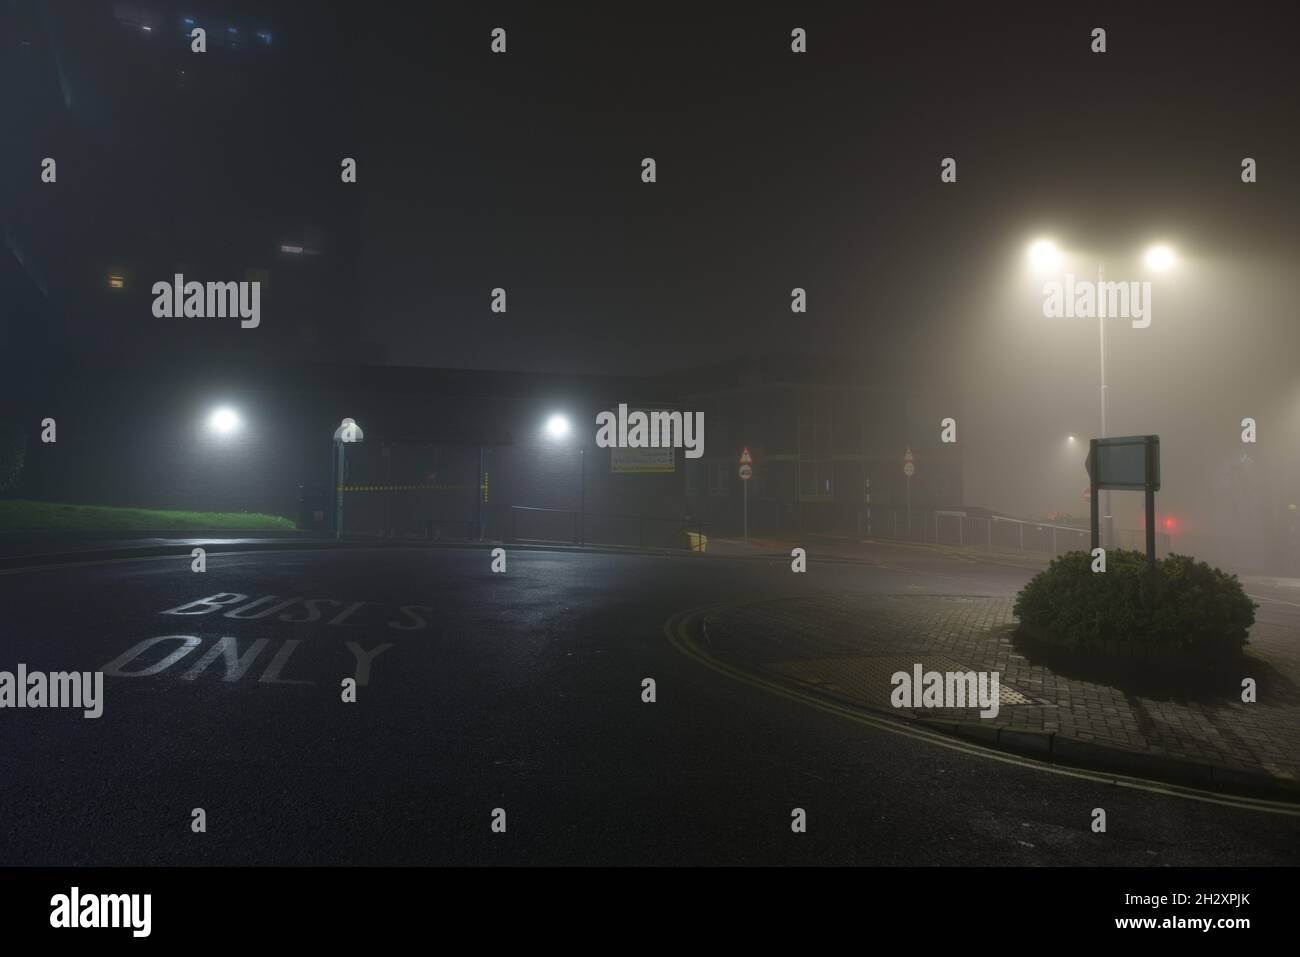 Sheffield, United Kingdom, 8th November, 2020: Bus turnaround point at Sheffield's Hallamshire hospital bus stop. Wide angle with thick fog at night. Stock Photo